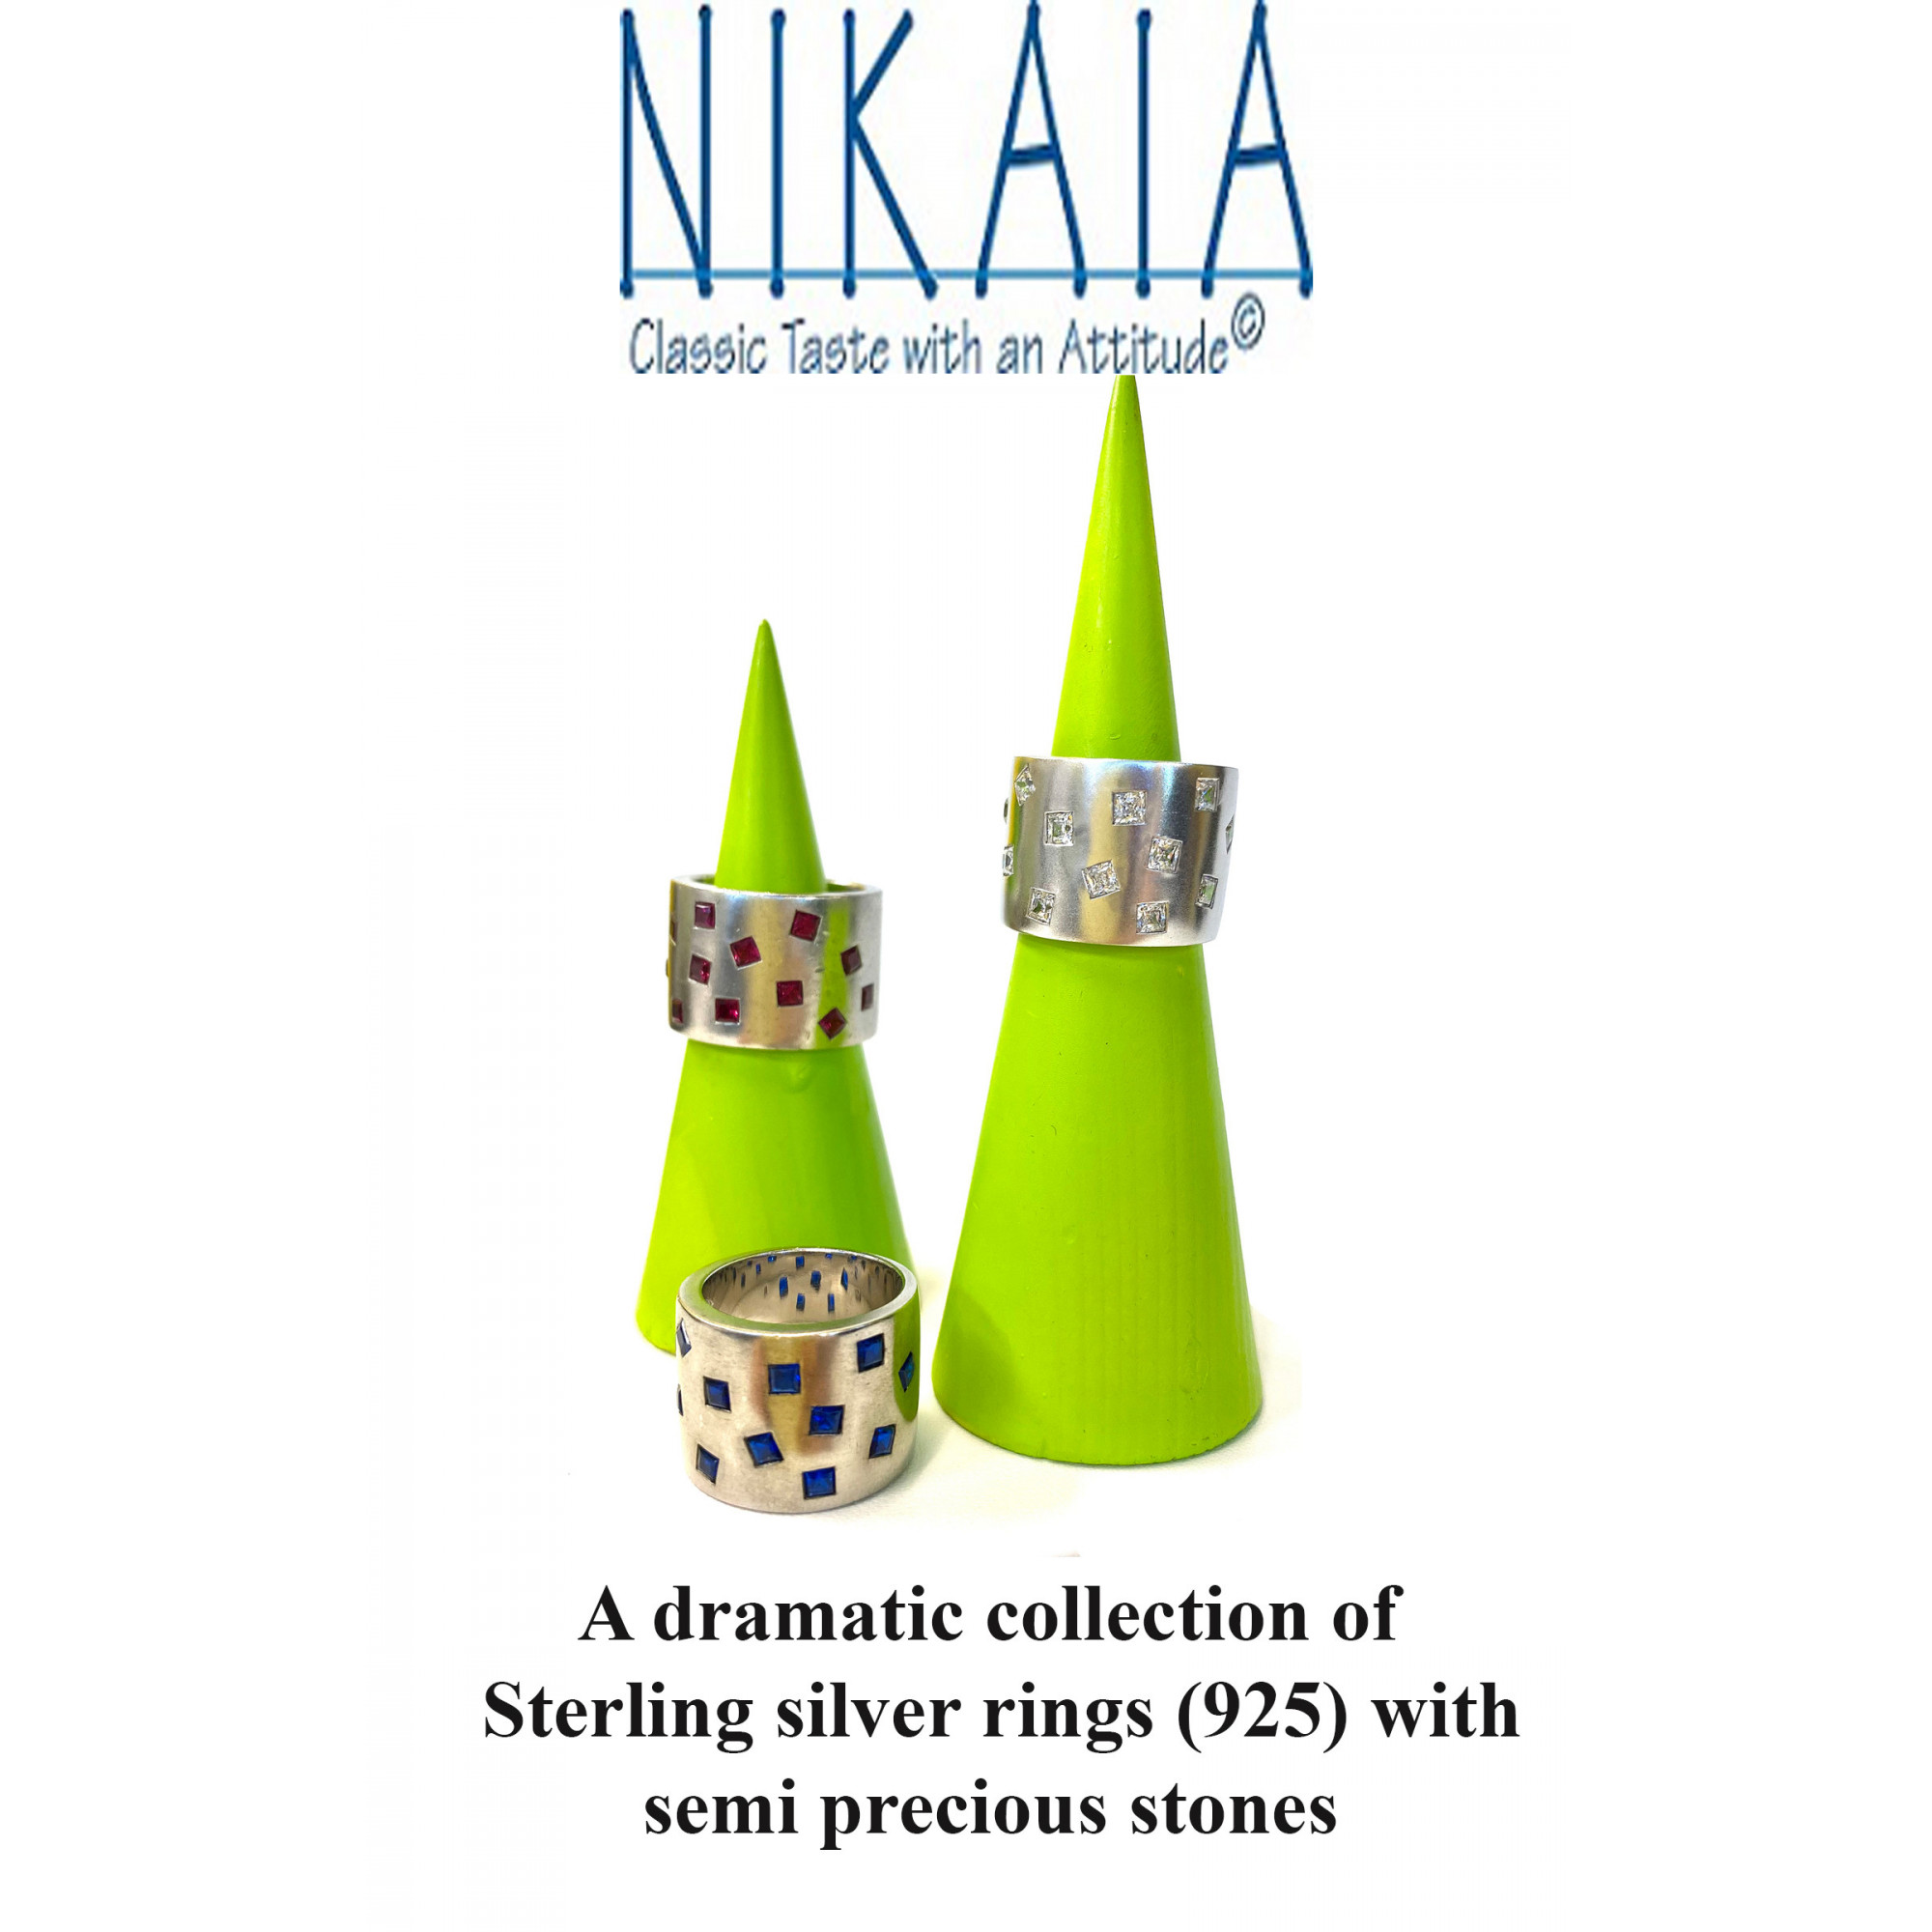 NIKAIA'S PRIVATE LABEL RING COLLECTION